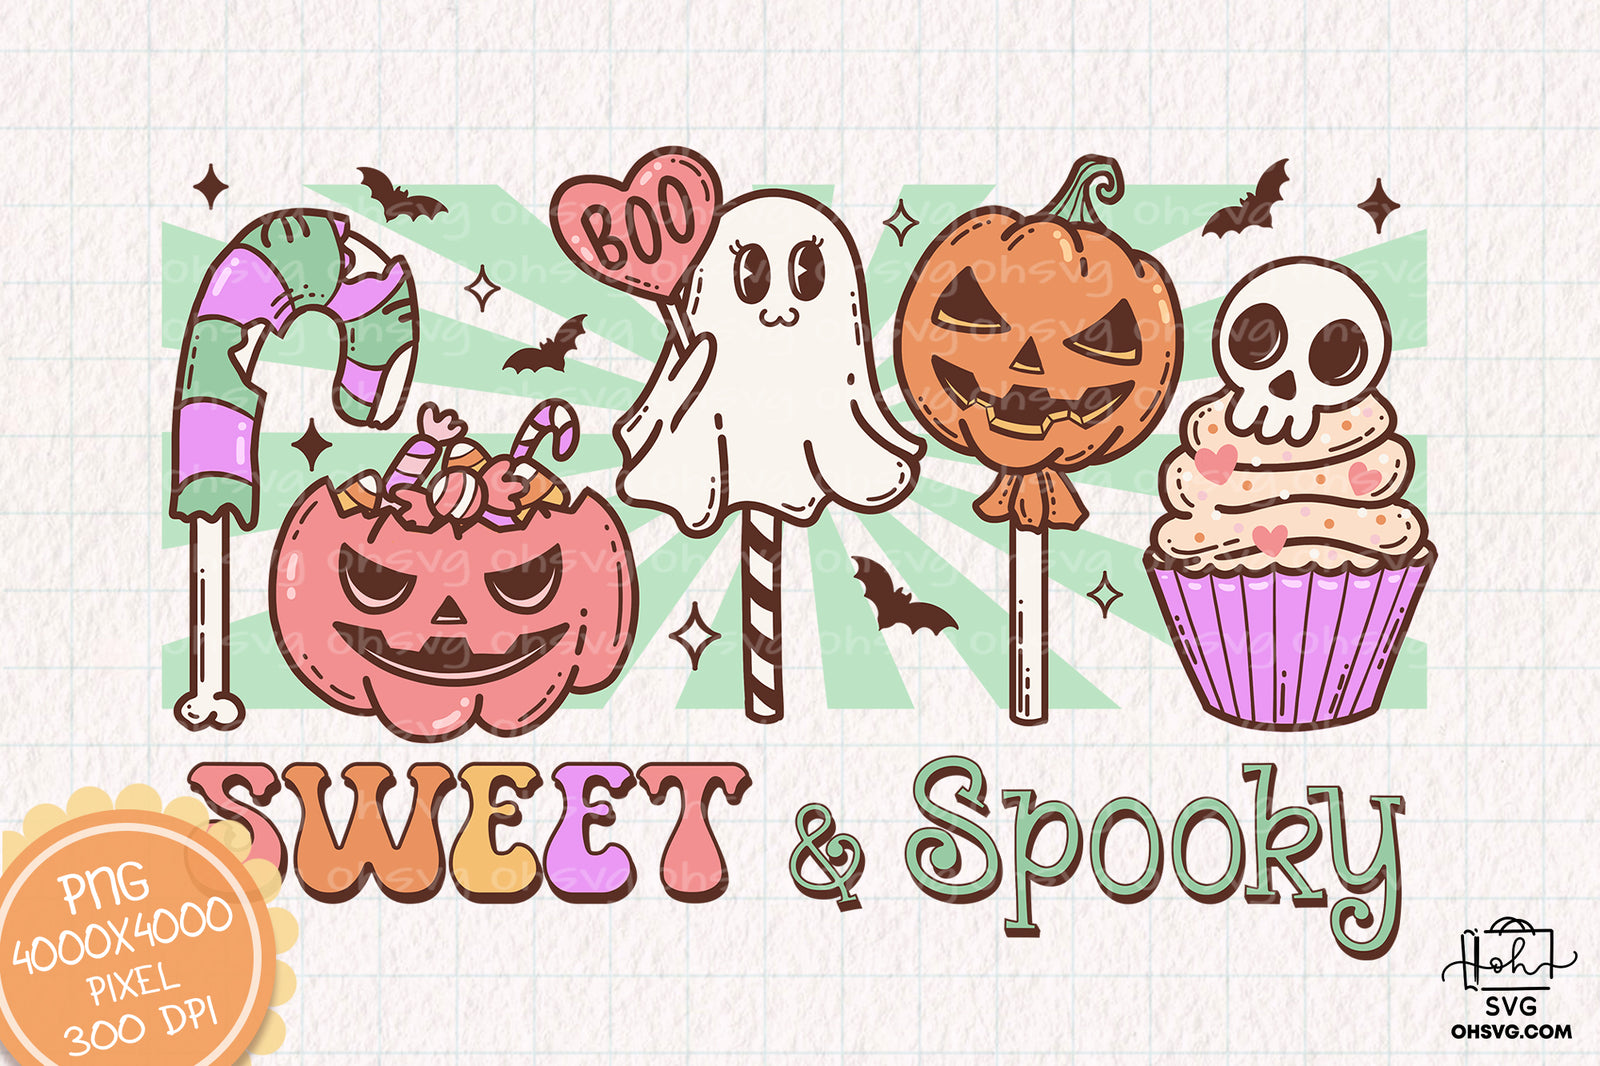 Wicked Cute Sublimation PNG, Spooky Halloweentown PNG, Halloween T